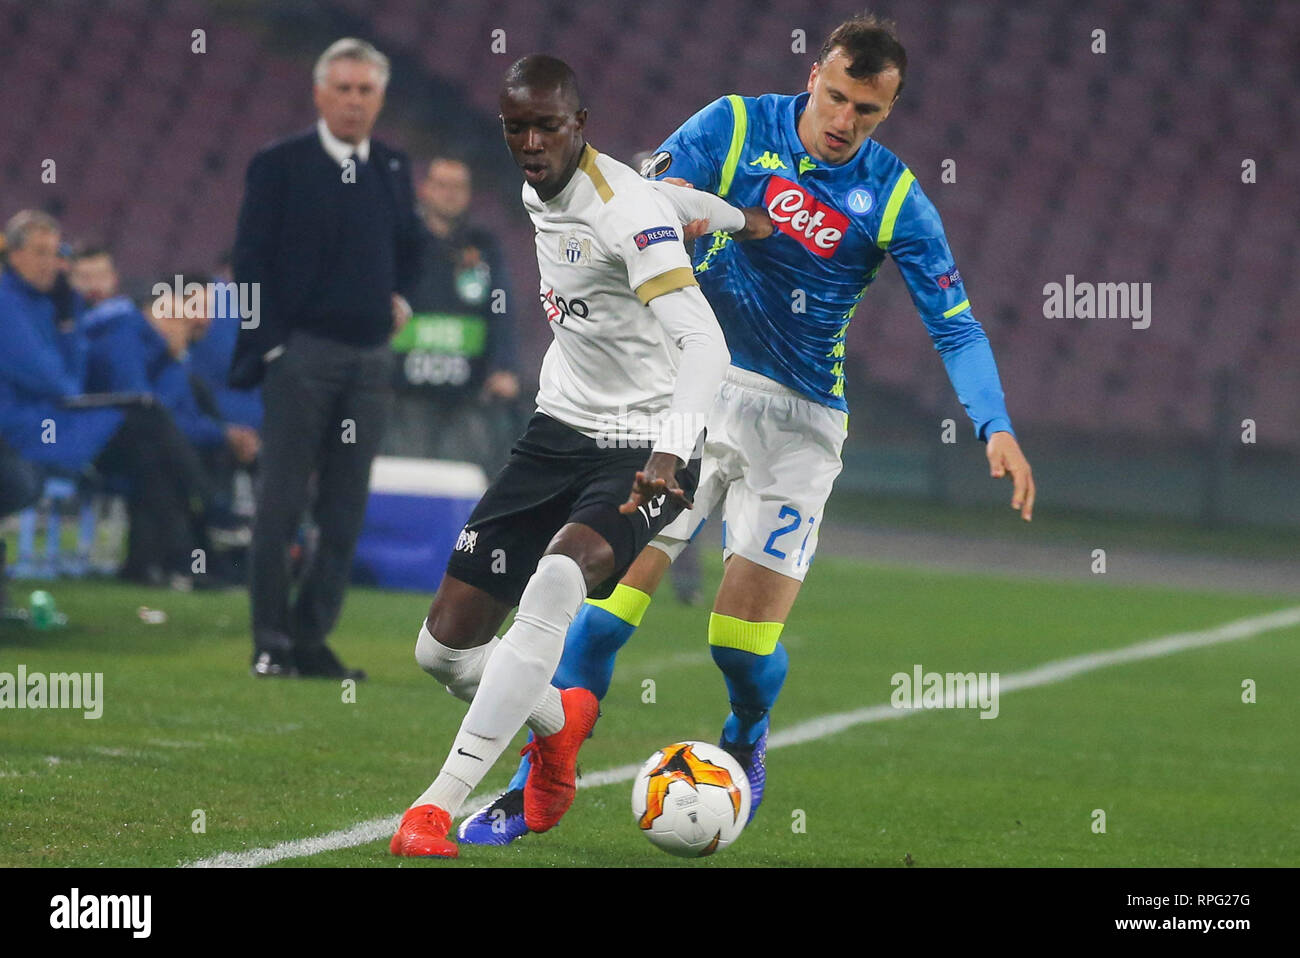 Naples, Italy. 21st Feb, 2019. Napoli, Campania, Italy, 2019-02-21, San Paolo Stadium, Europa League football match SSC Napoli - FC Zurich in pictures Vlad Chiriches defender of ssc napoli contend the ball with Assan Ceesay striker of Zurigo, the final result of the match is 2-0 for ssc napoli (Antonio Balasco - Pacific Press) Credit: Antonio Balasco/Pacific Press/Alamy Live News Stock Photo